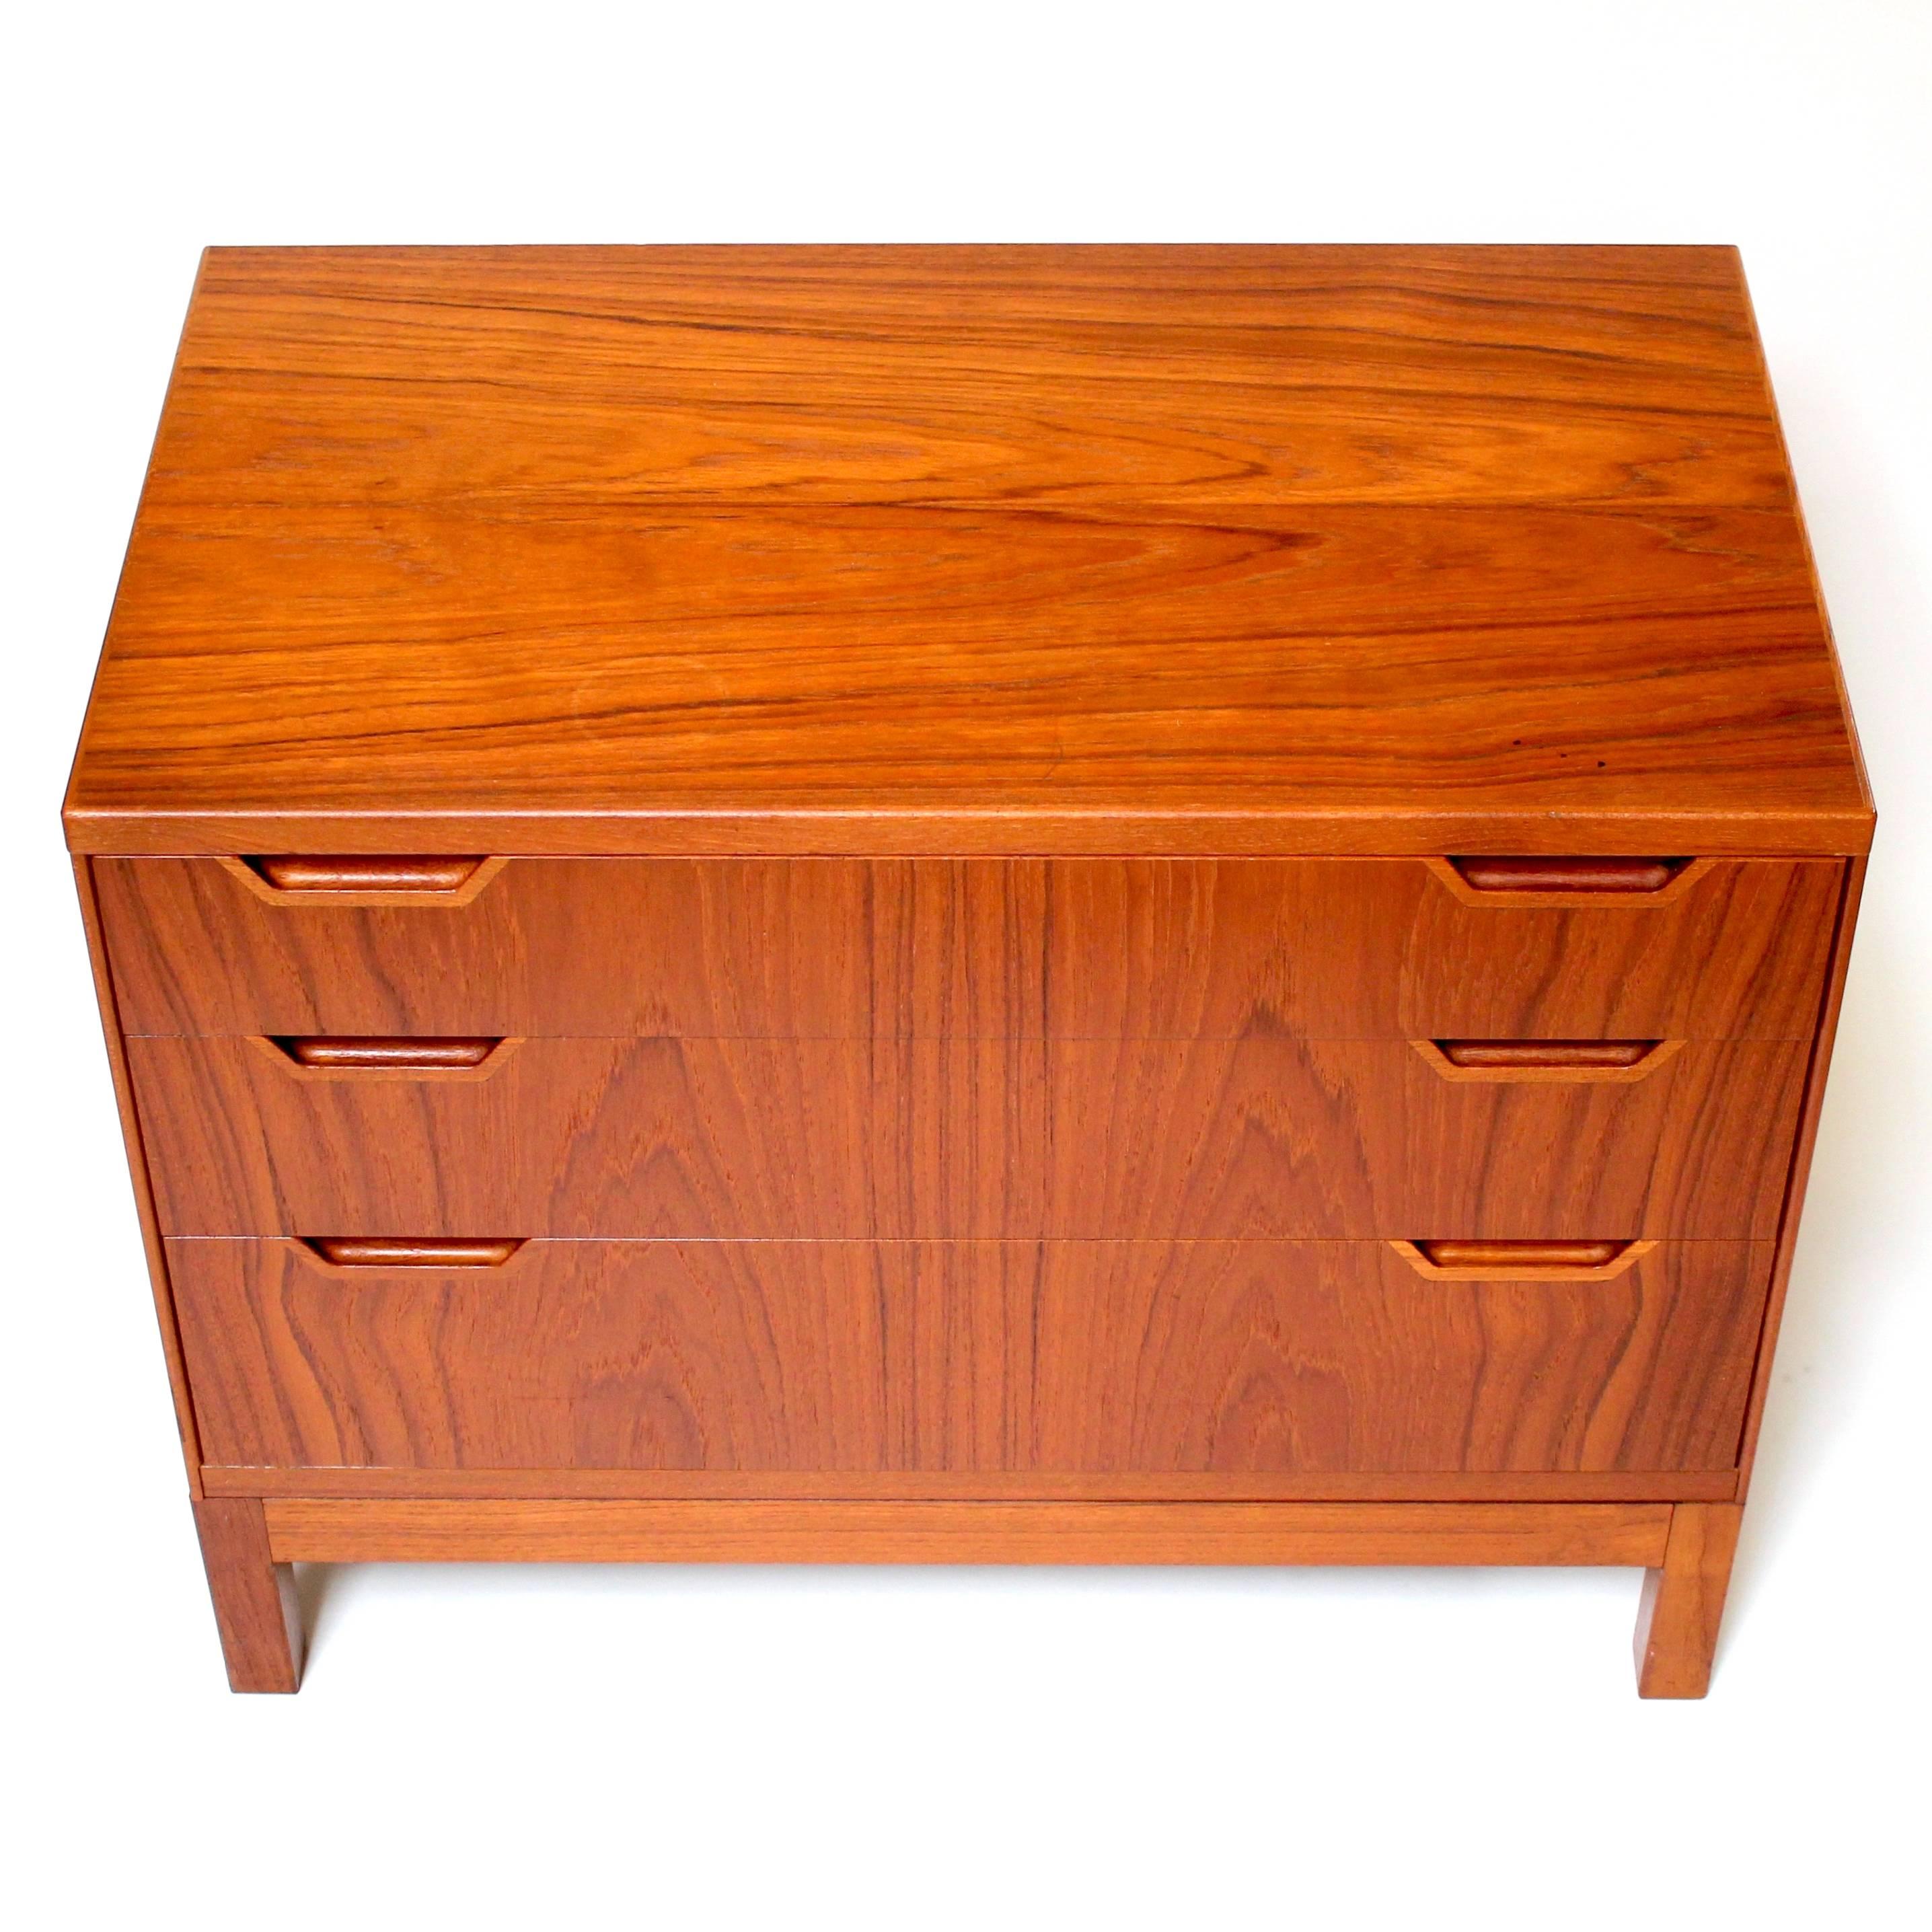 1960s Svend Langkilde Teak Chest of Drawers In Excellent Condition For Sale In Sacramento, CA